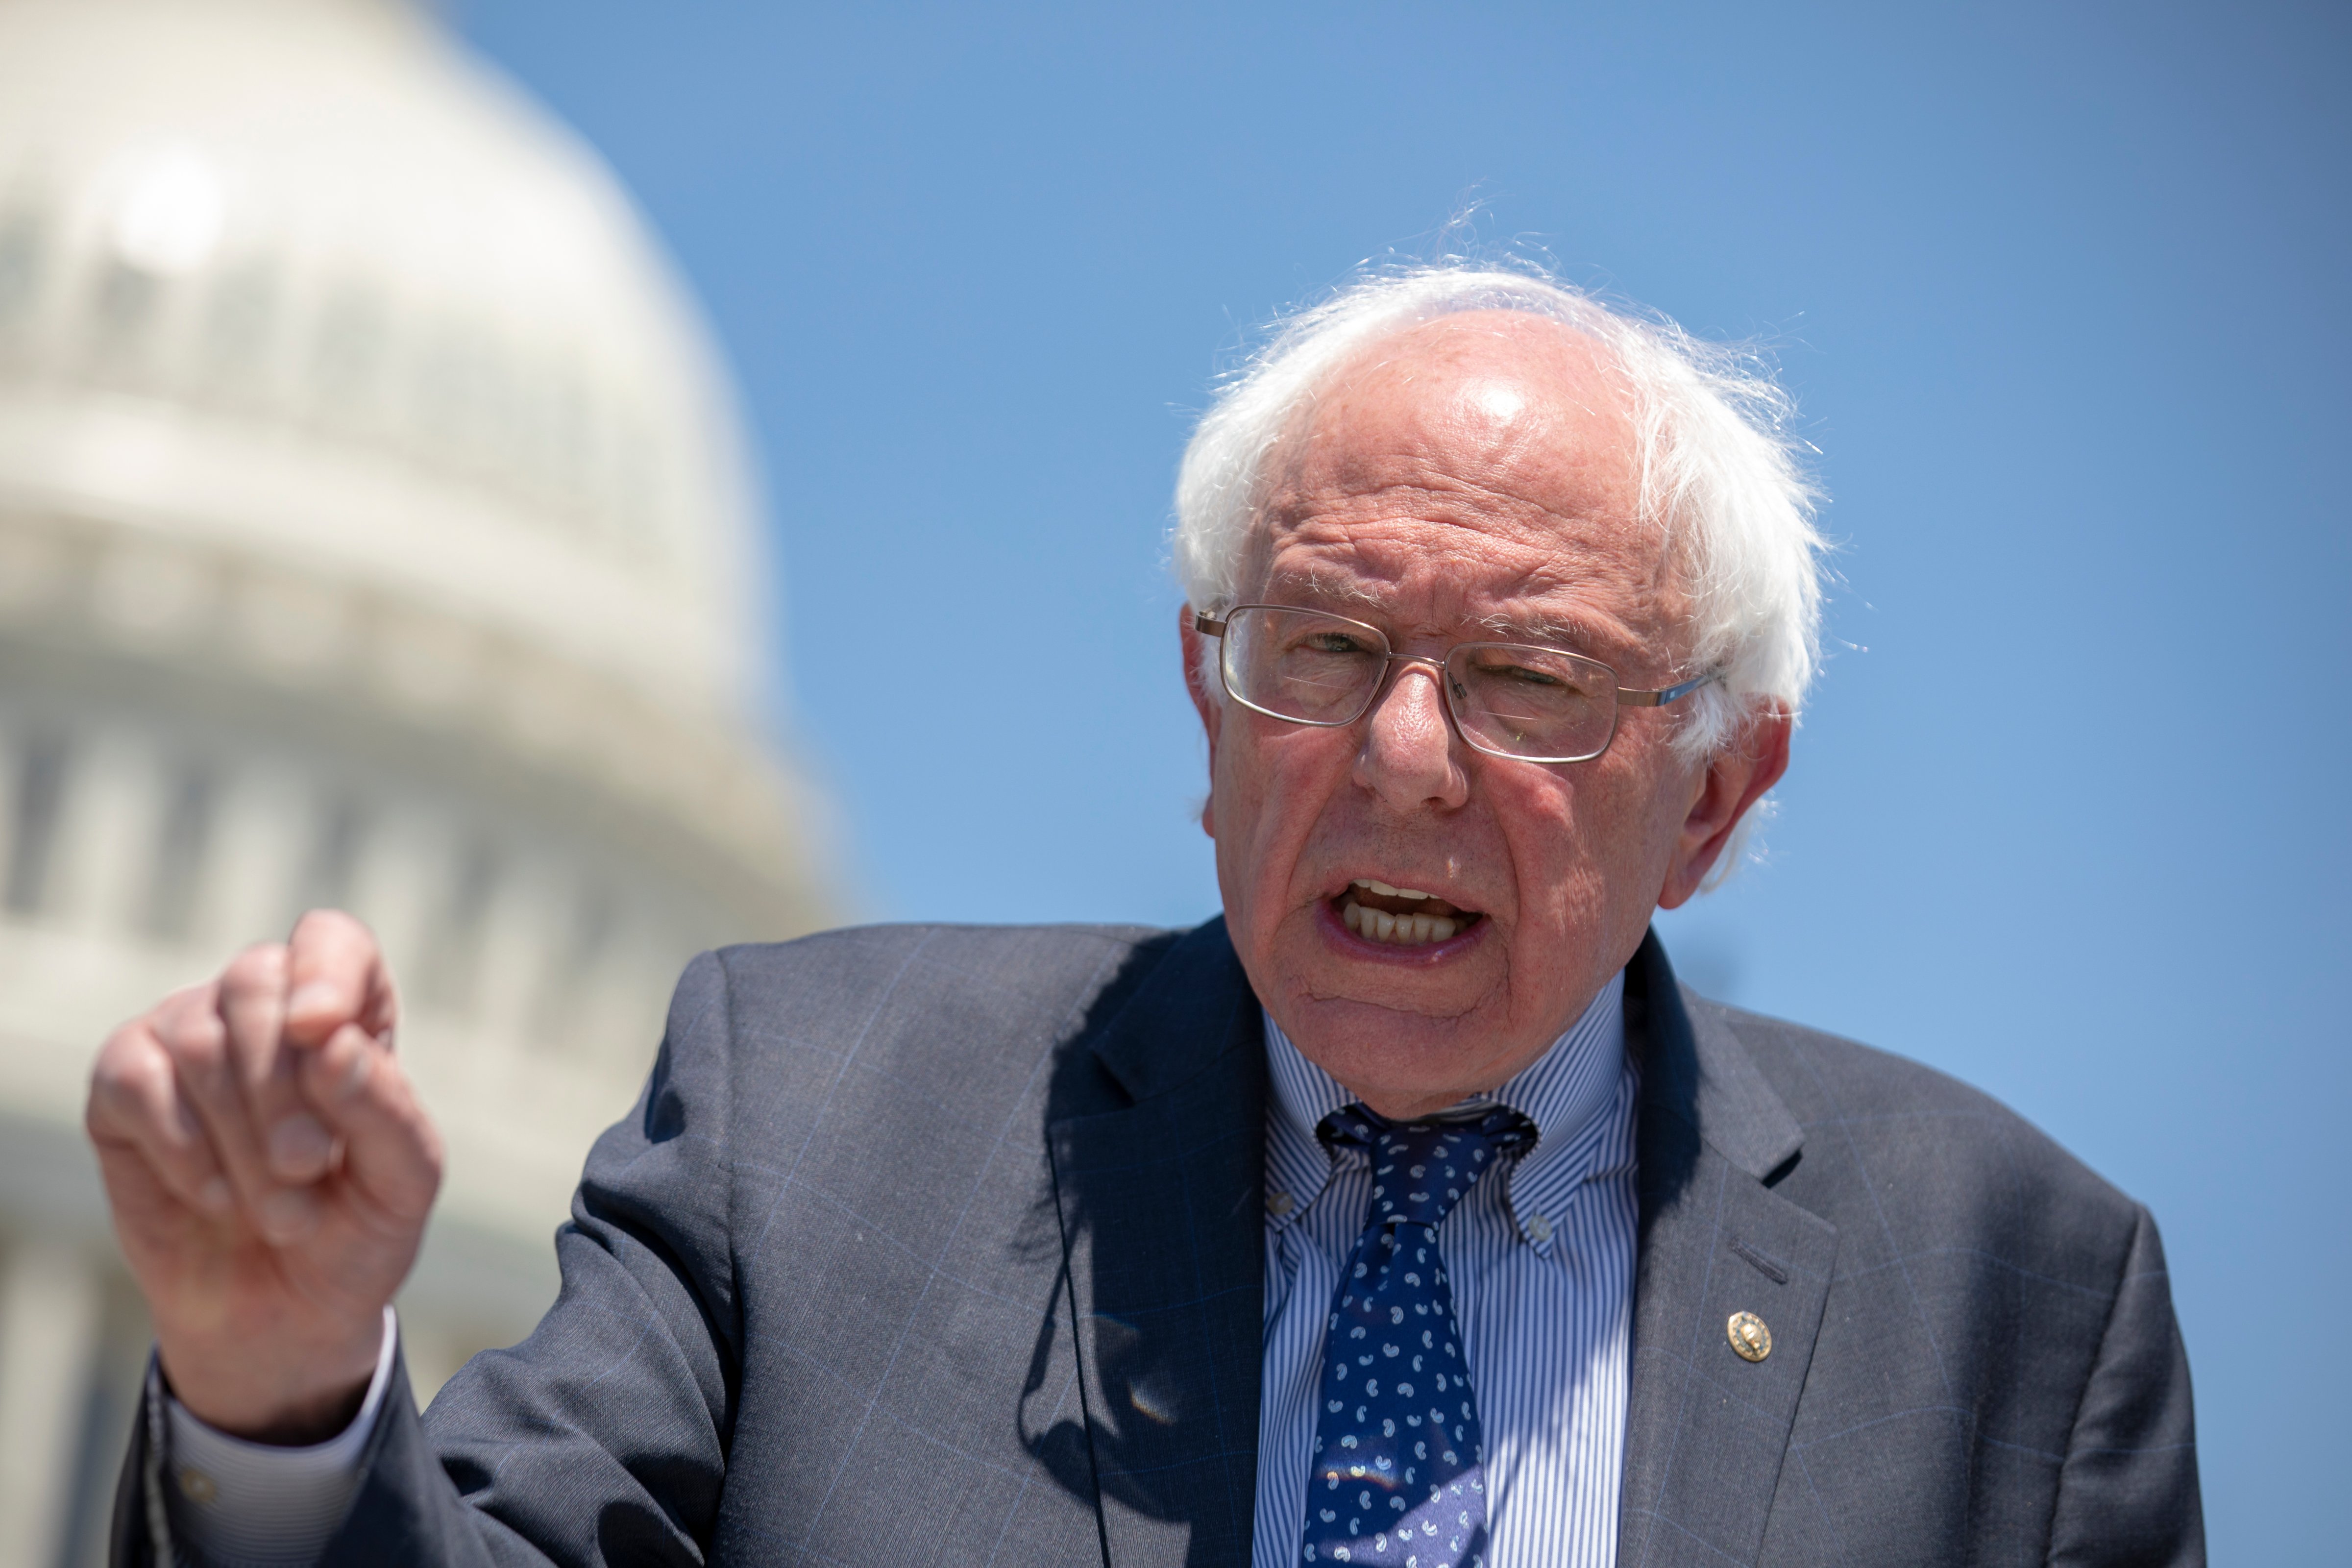 Sen. Bernie Sanders (I-VT) speaks during a news conference regarding the separation of immigrant children at the U.S. Capitol on July 10, 2018 in Washington, DC. Alex Edelman—Getty Images (Alex Edelman—Getty Images)